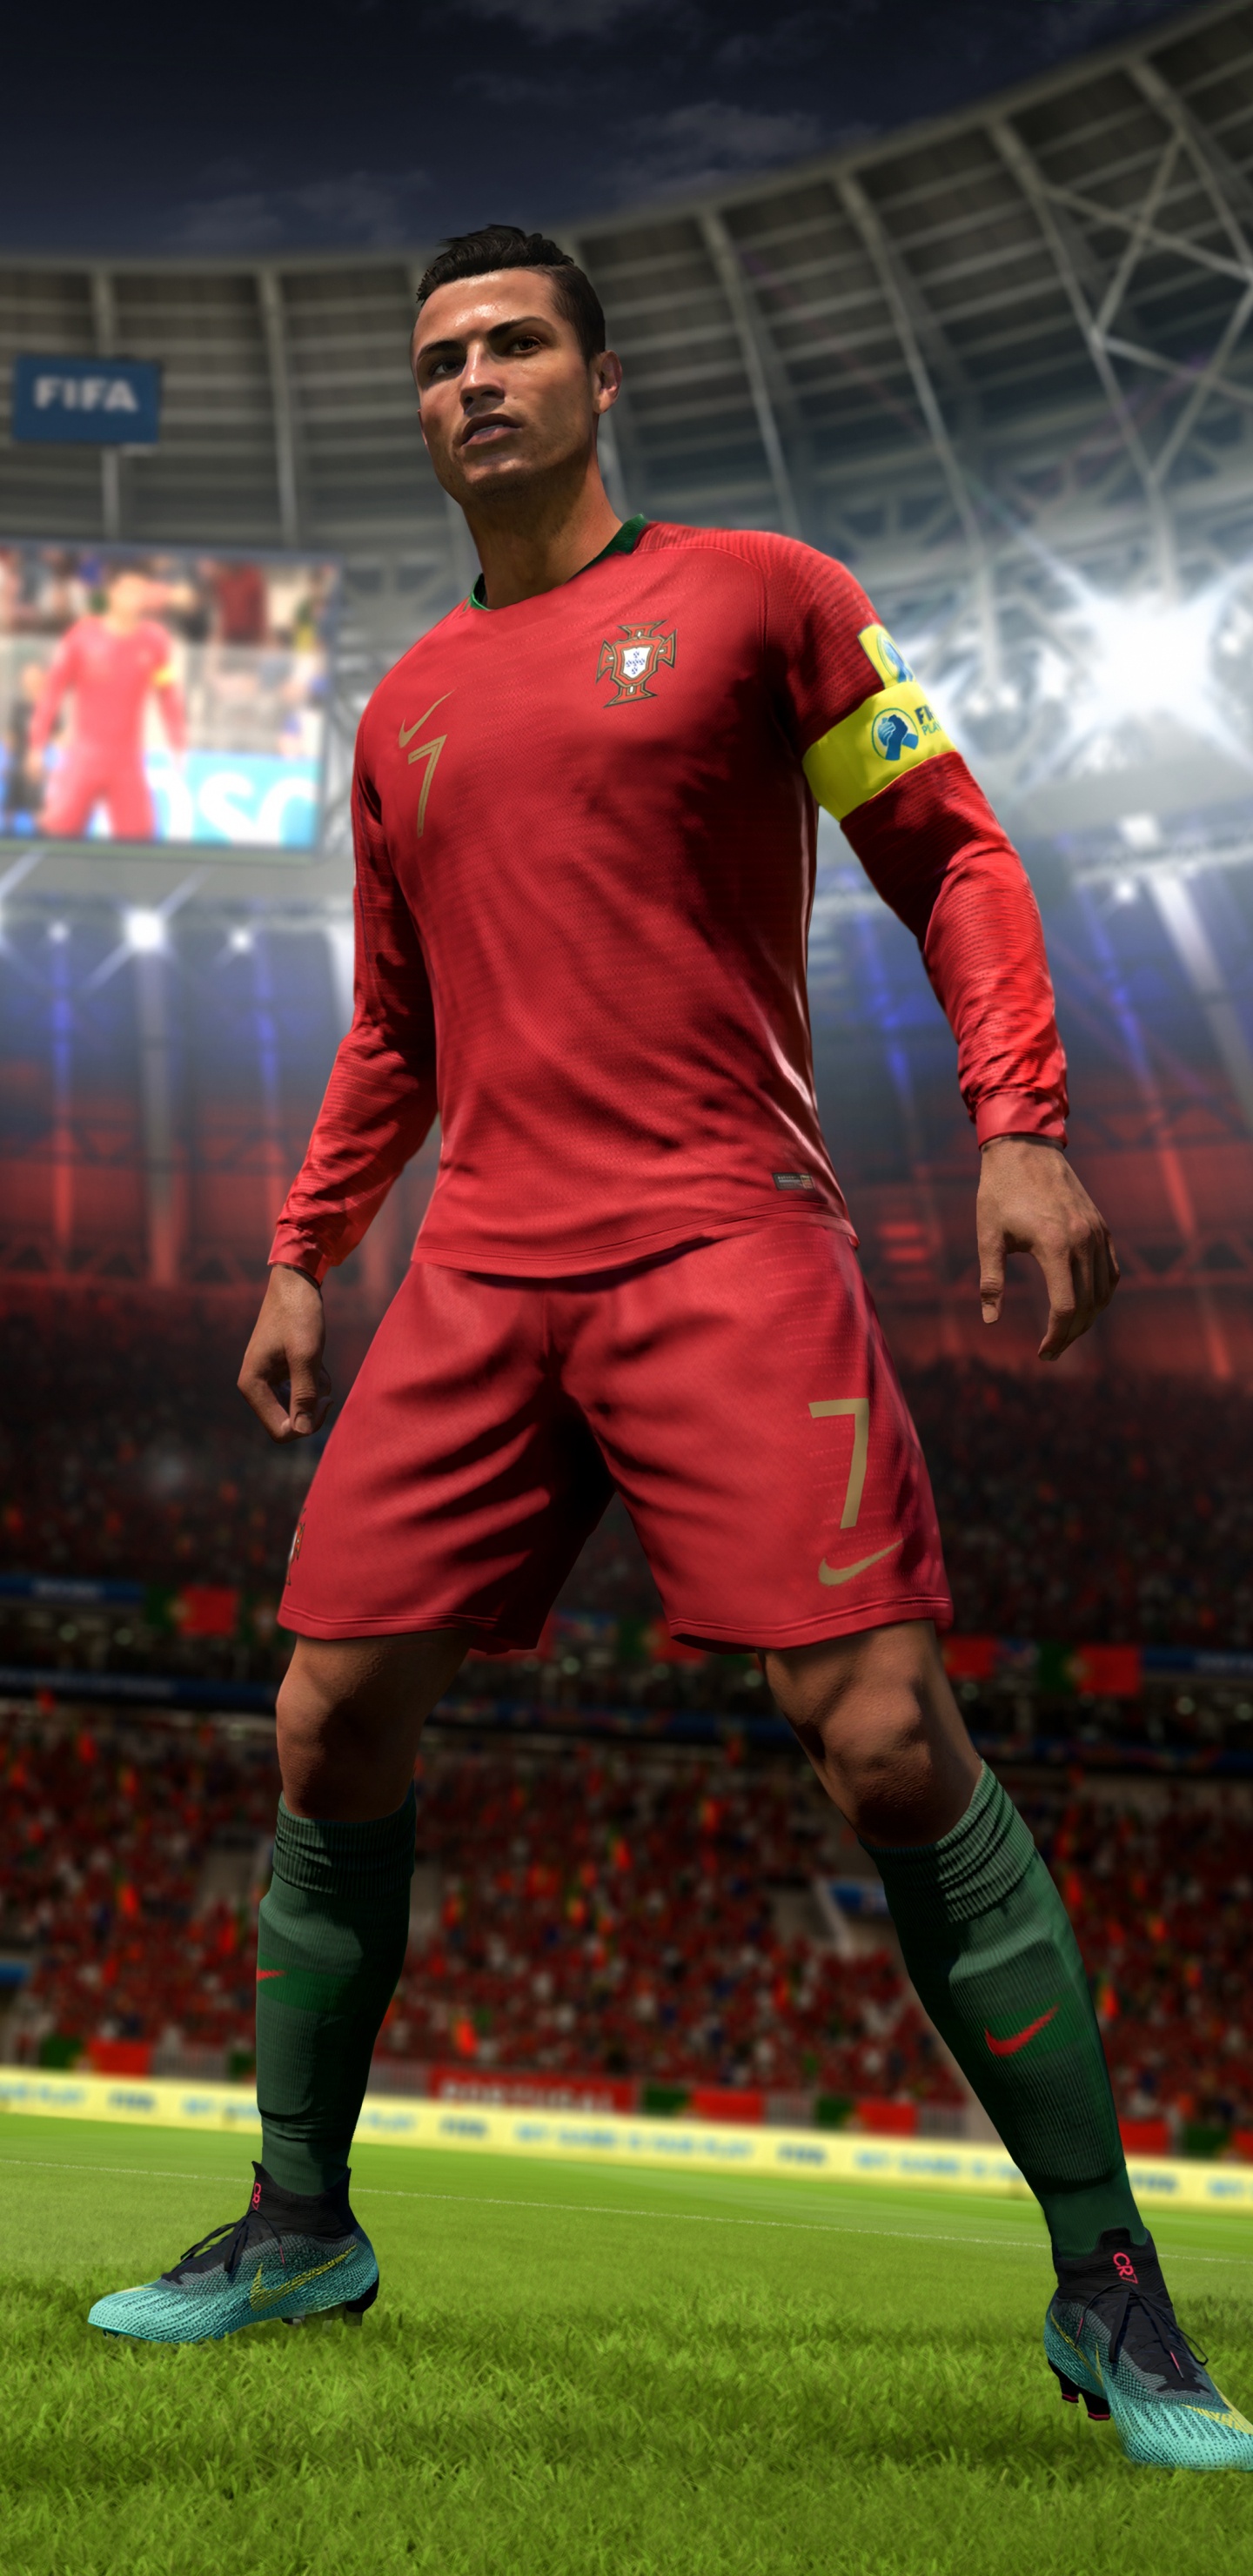 Fifa 18, 2018 World Cup, ea Sports, Electronic Arts, Playstation 4. Wallpaper in 1440x2960 Resolution